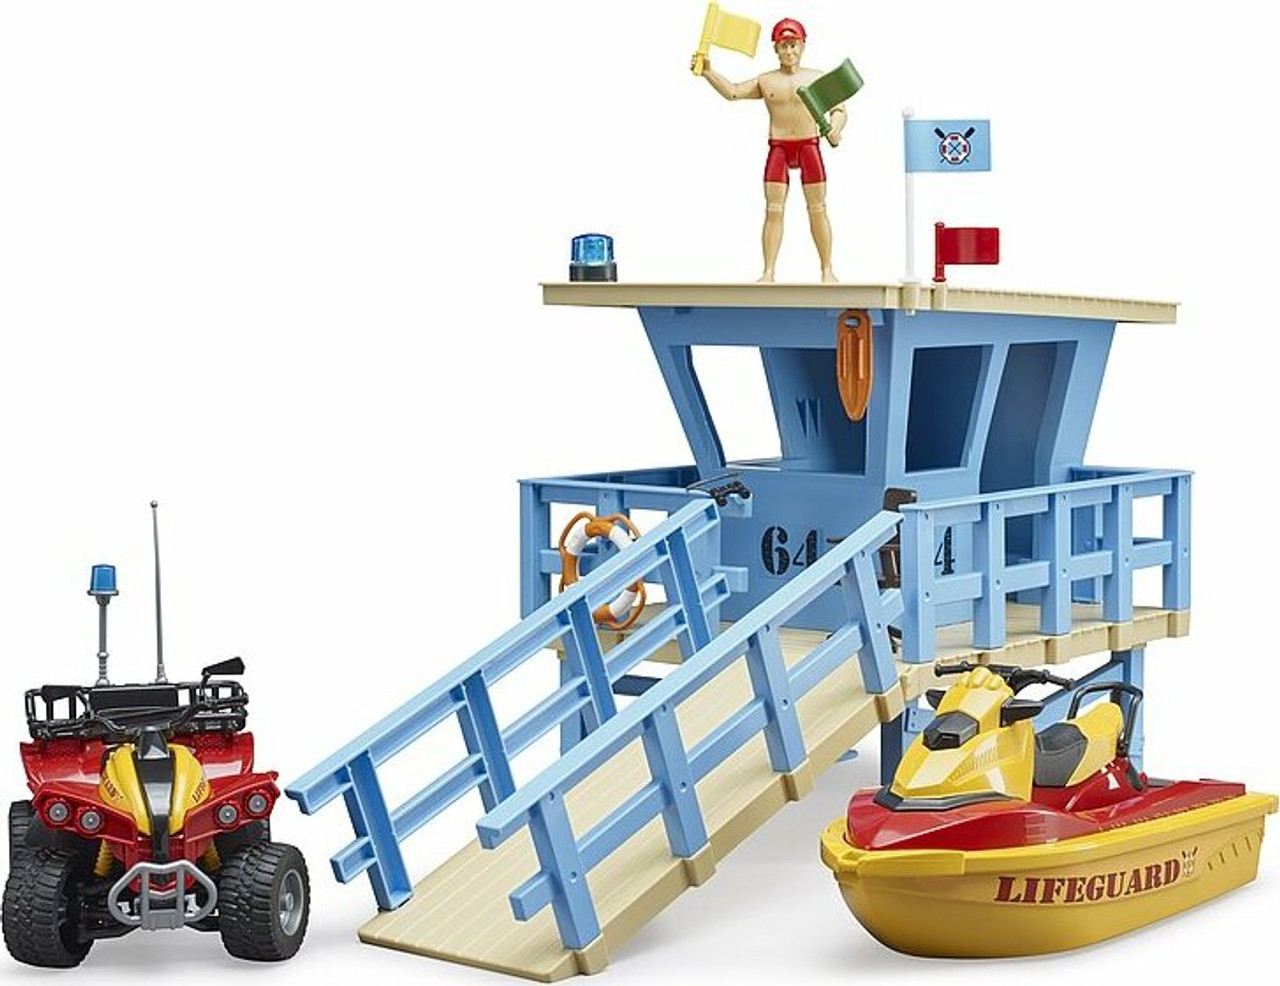 bworld lifeguard station with quad bike and personal water craft 1